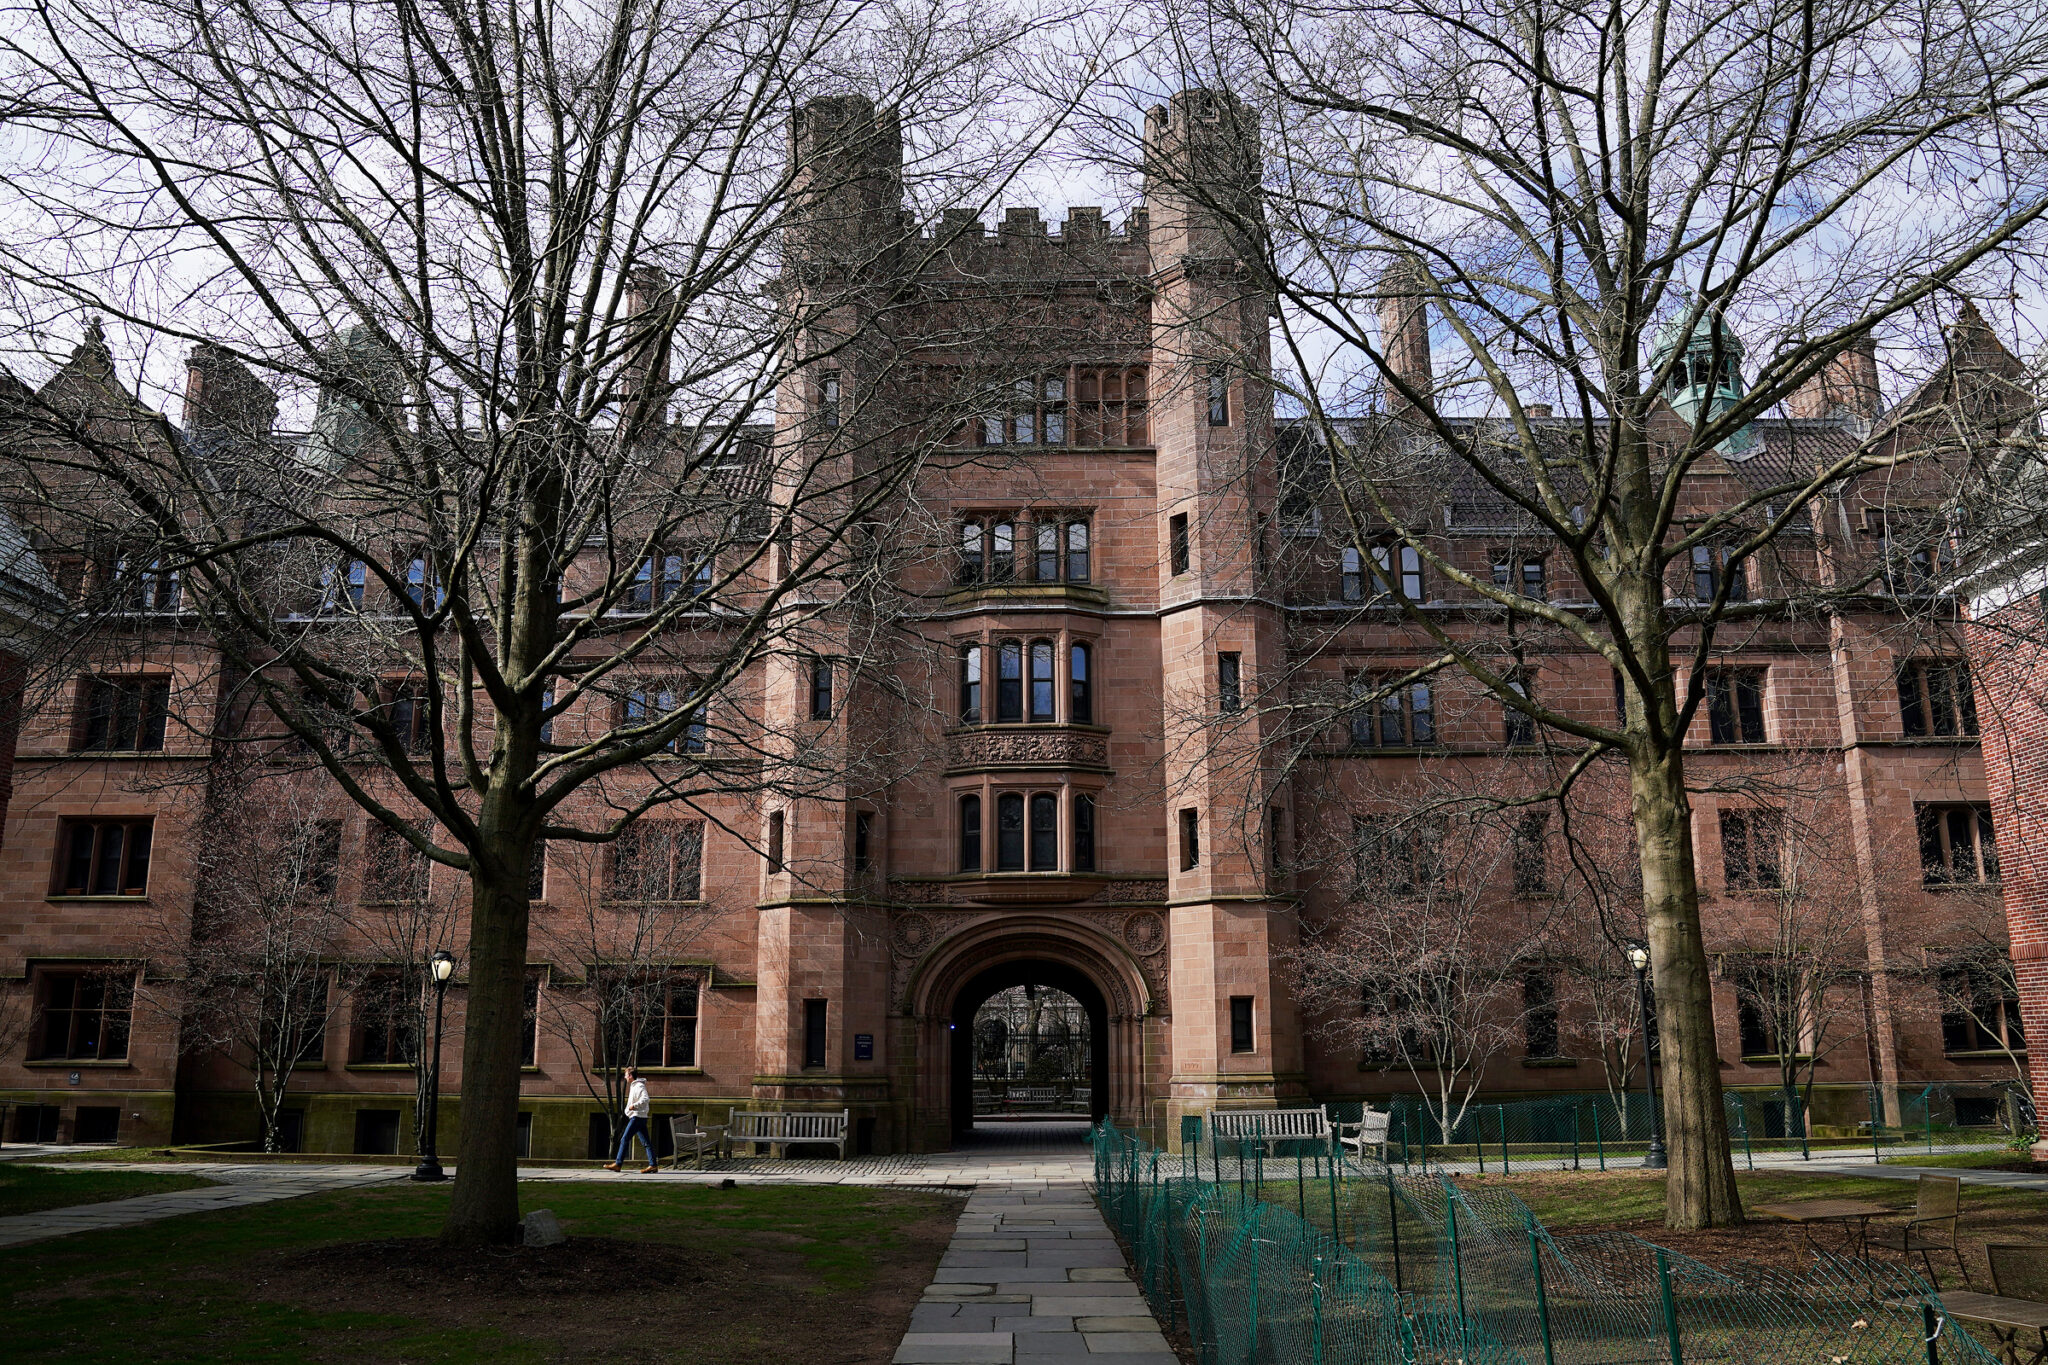 Yale under investigation for 'response to complaints of alleged  discrimination,' details unclear - Yale Daily News